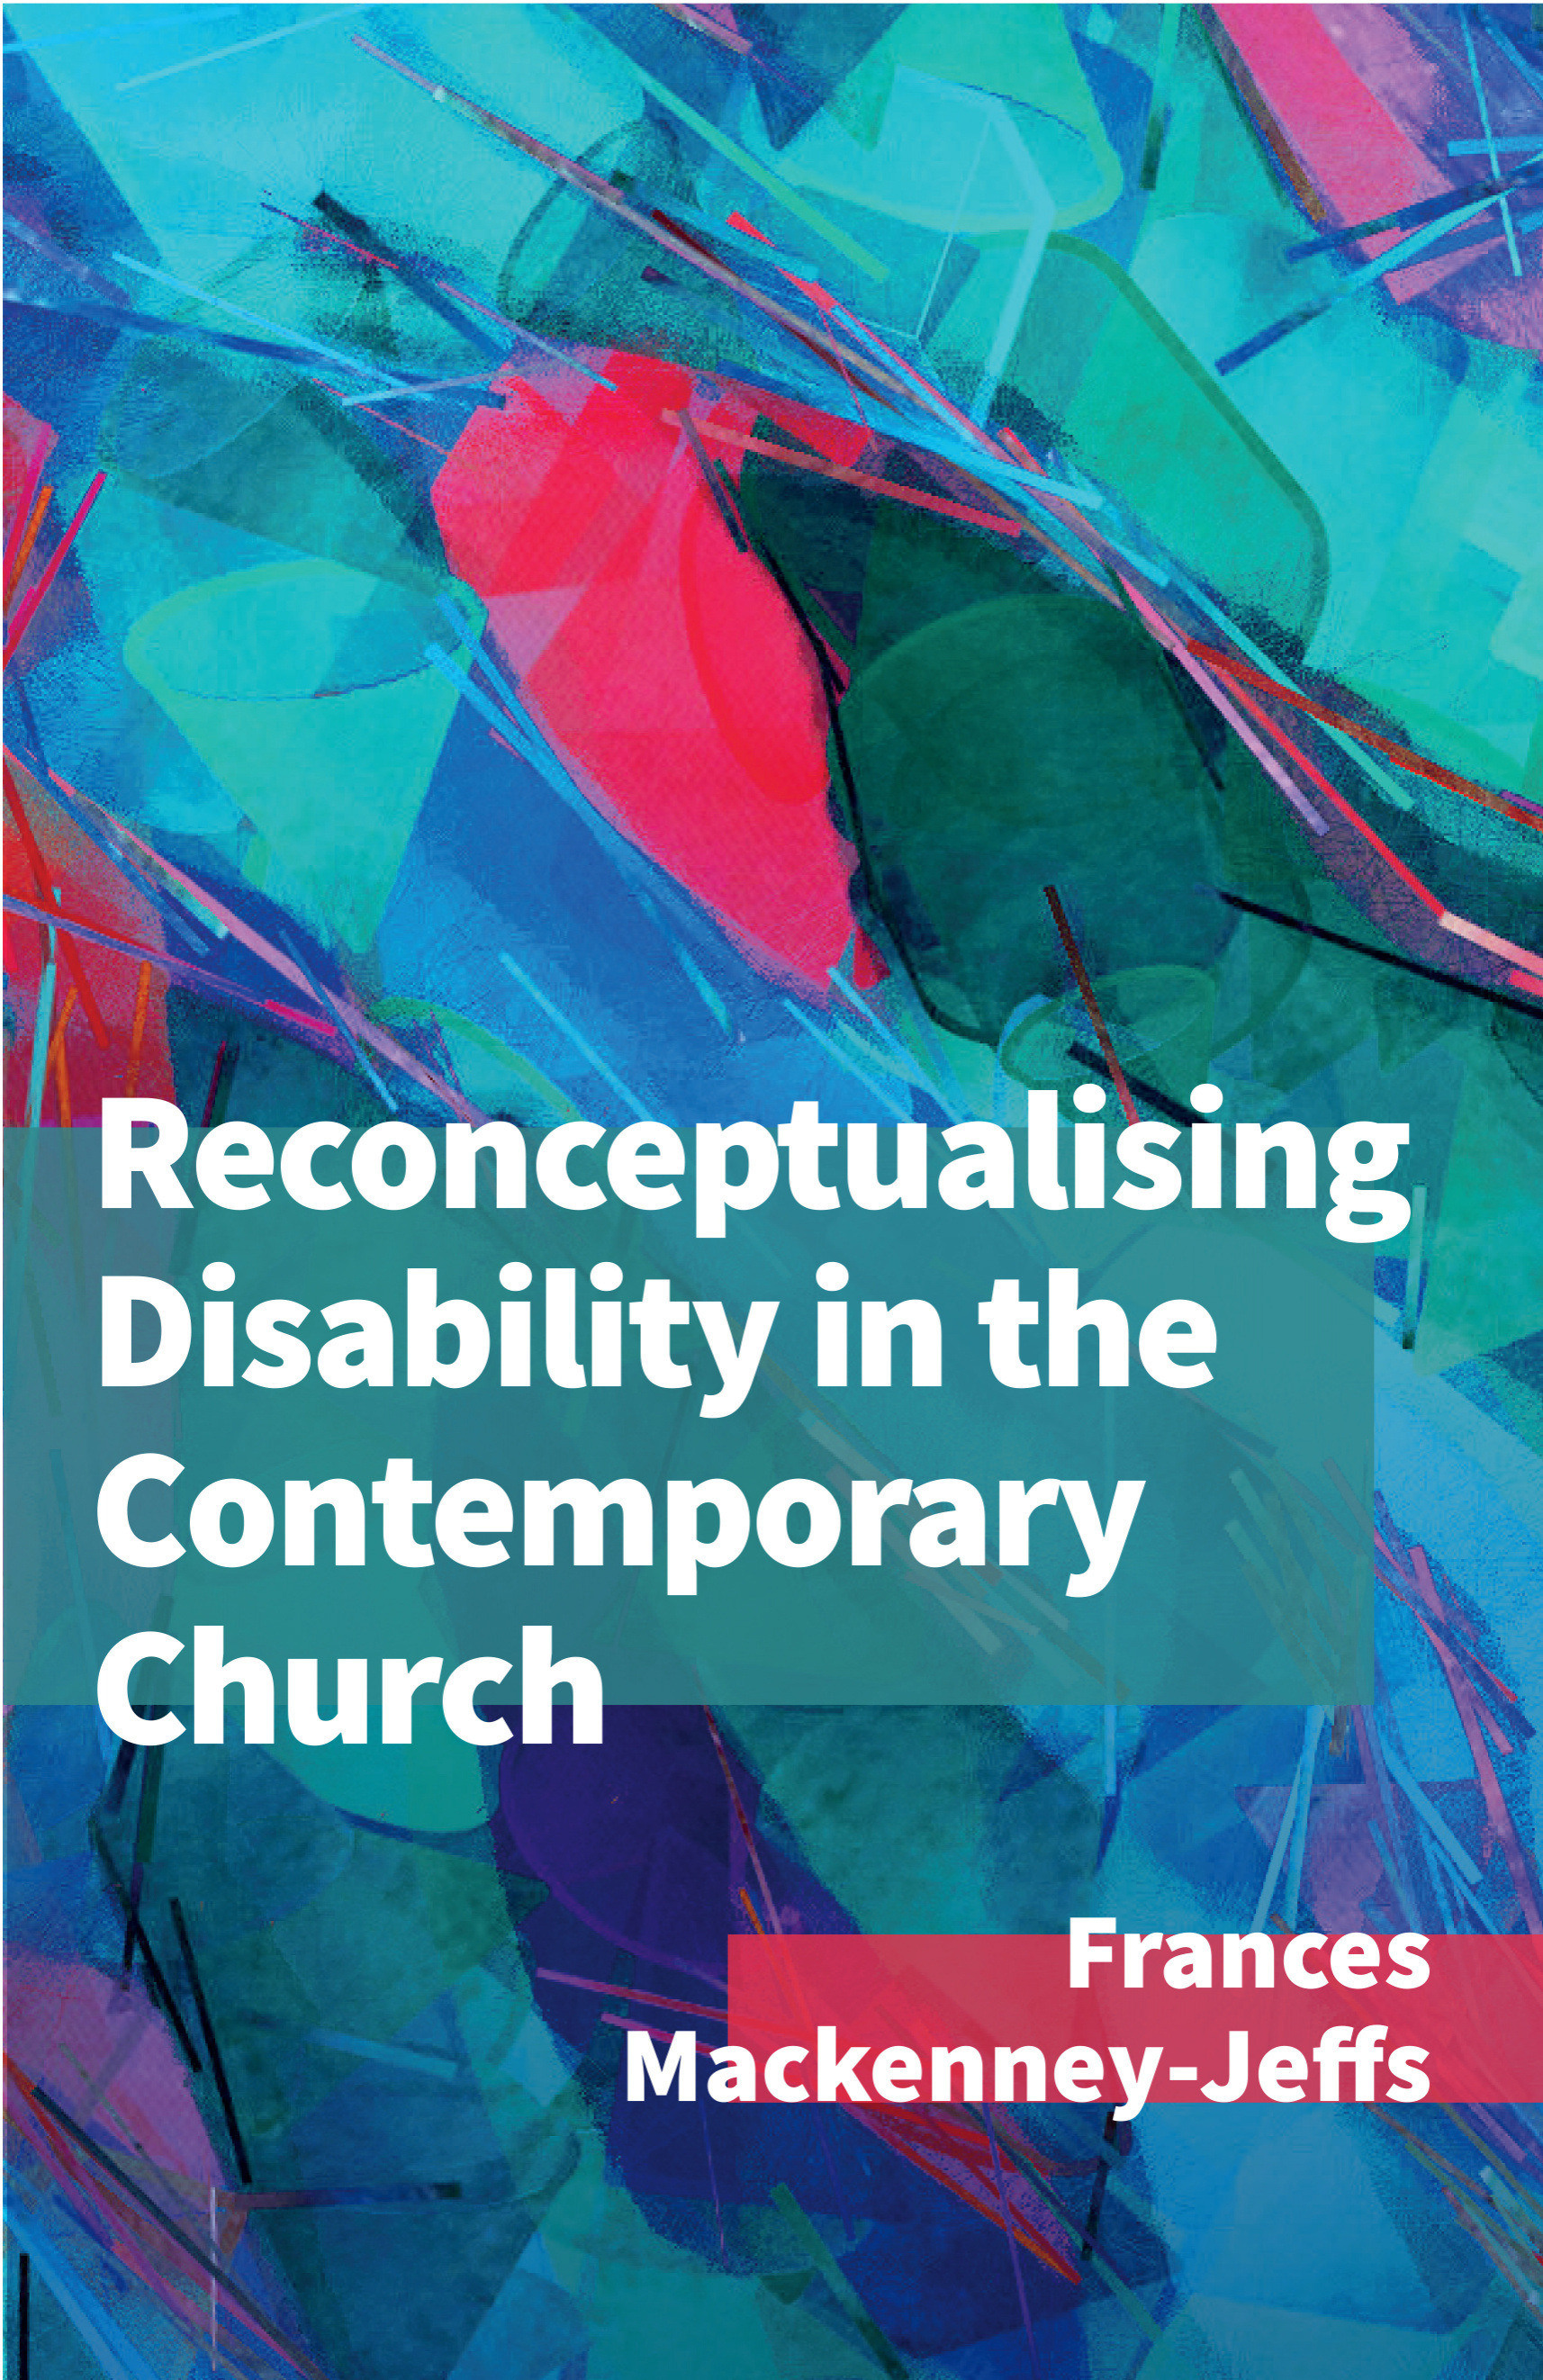 Reconceptualising Disability for the Contemporary Church (Paperback)